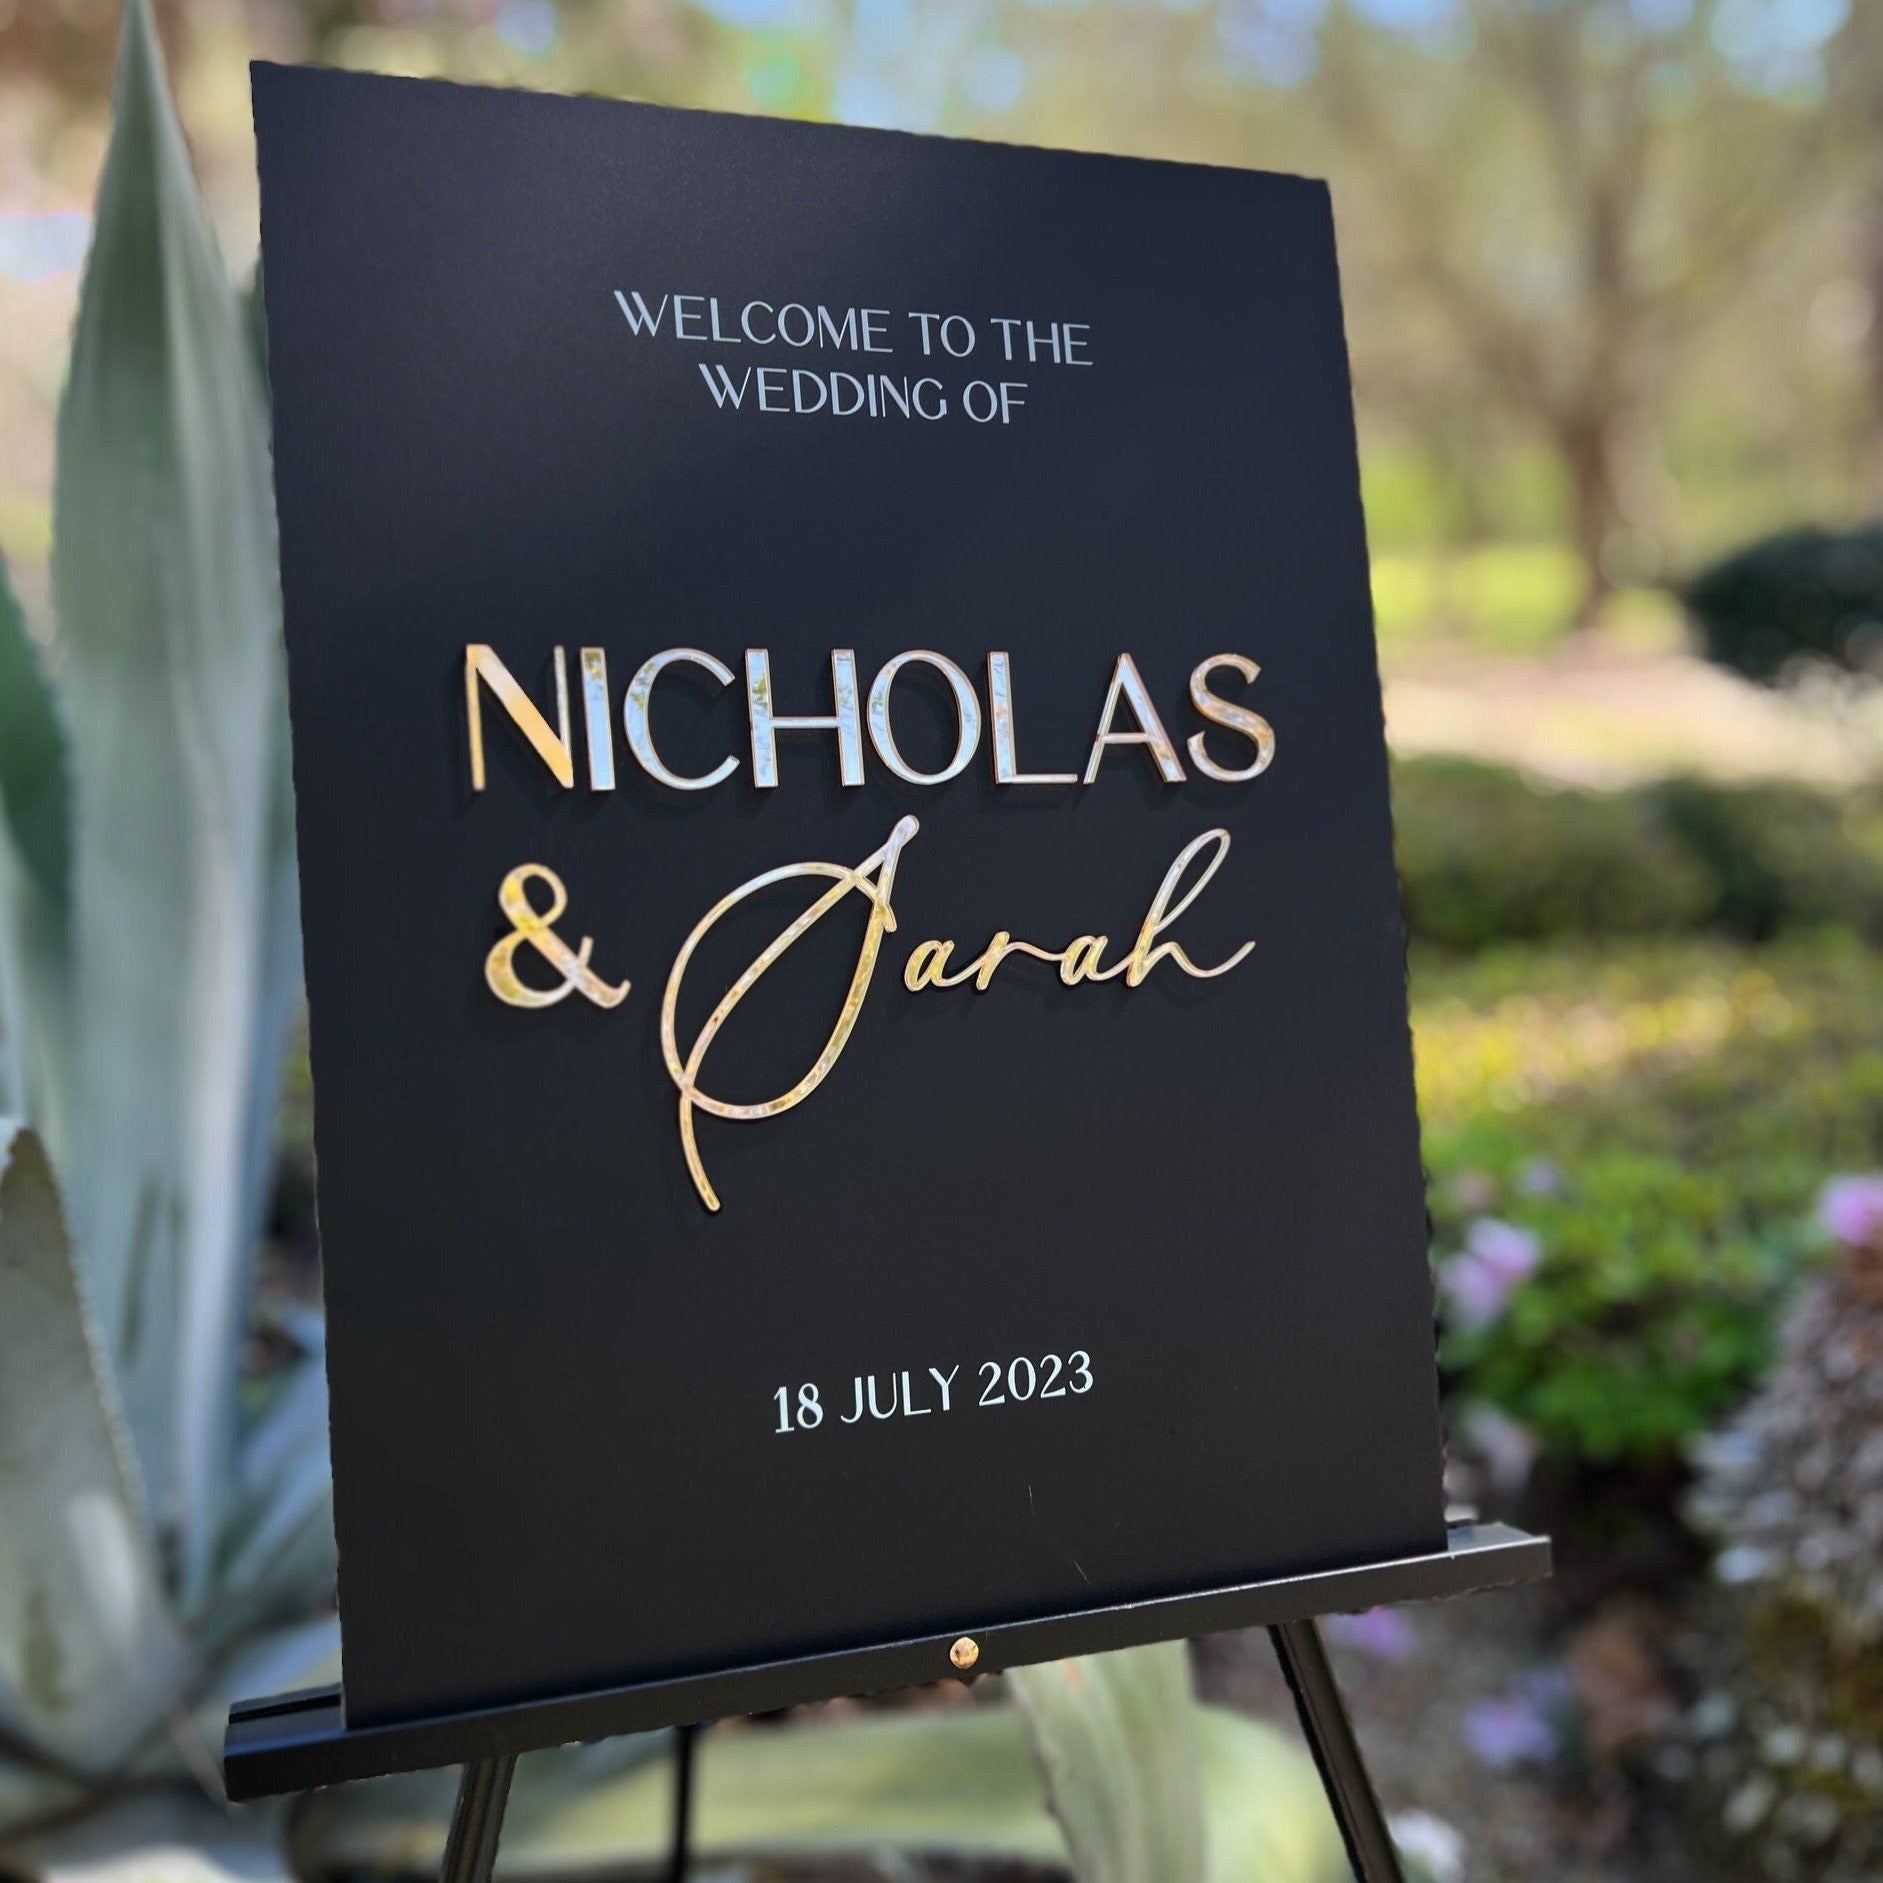 CHOOSE YOUR DESIGN: 3D Event Entry Signs with Laser Cut Wording - Sign Sizes 18"x24" or 24"x36"